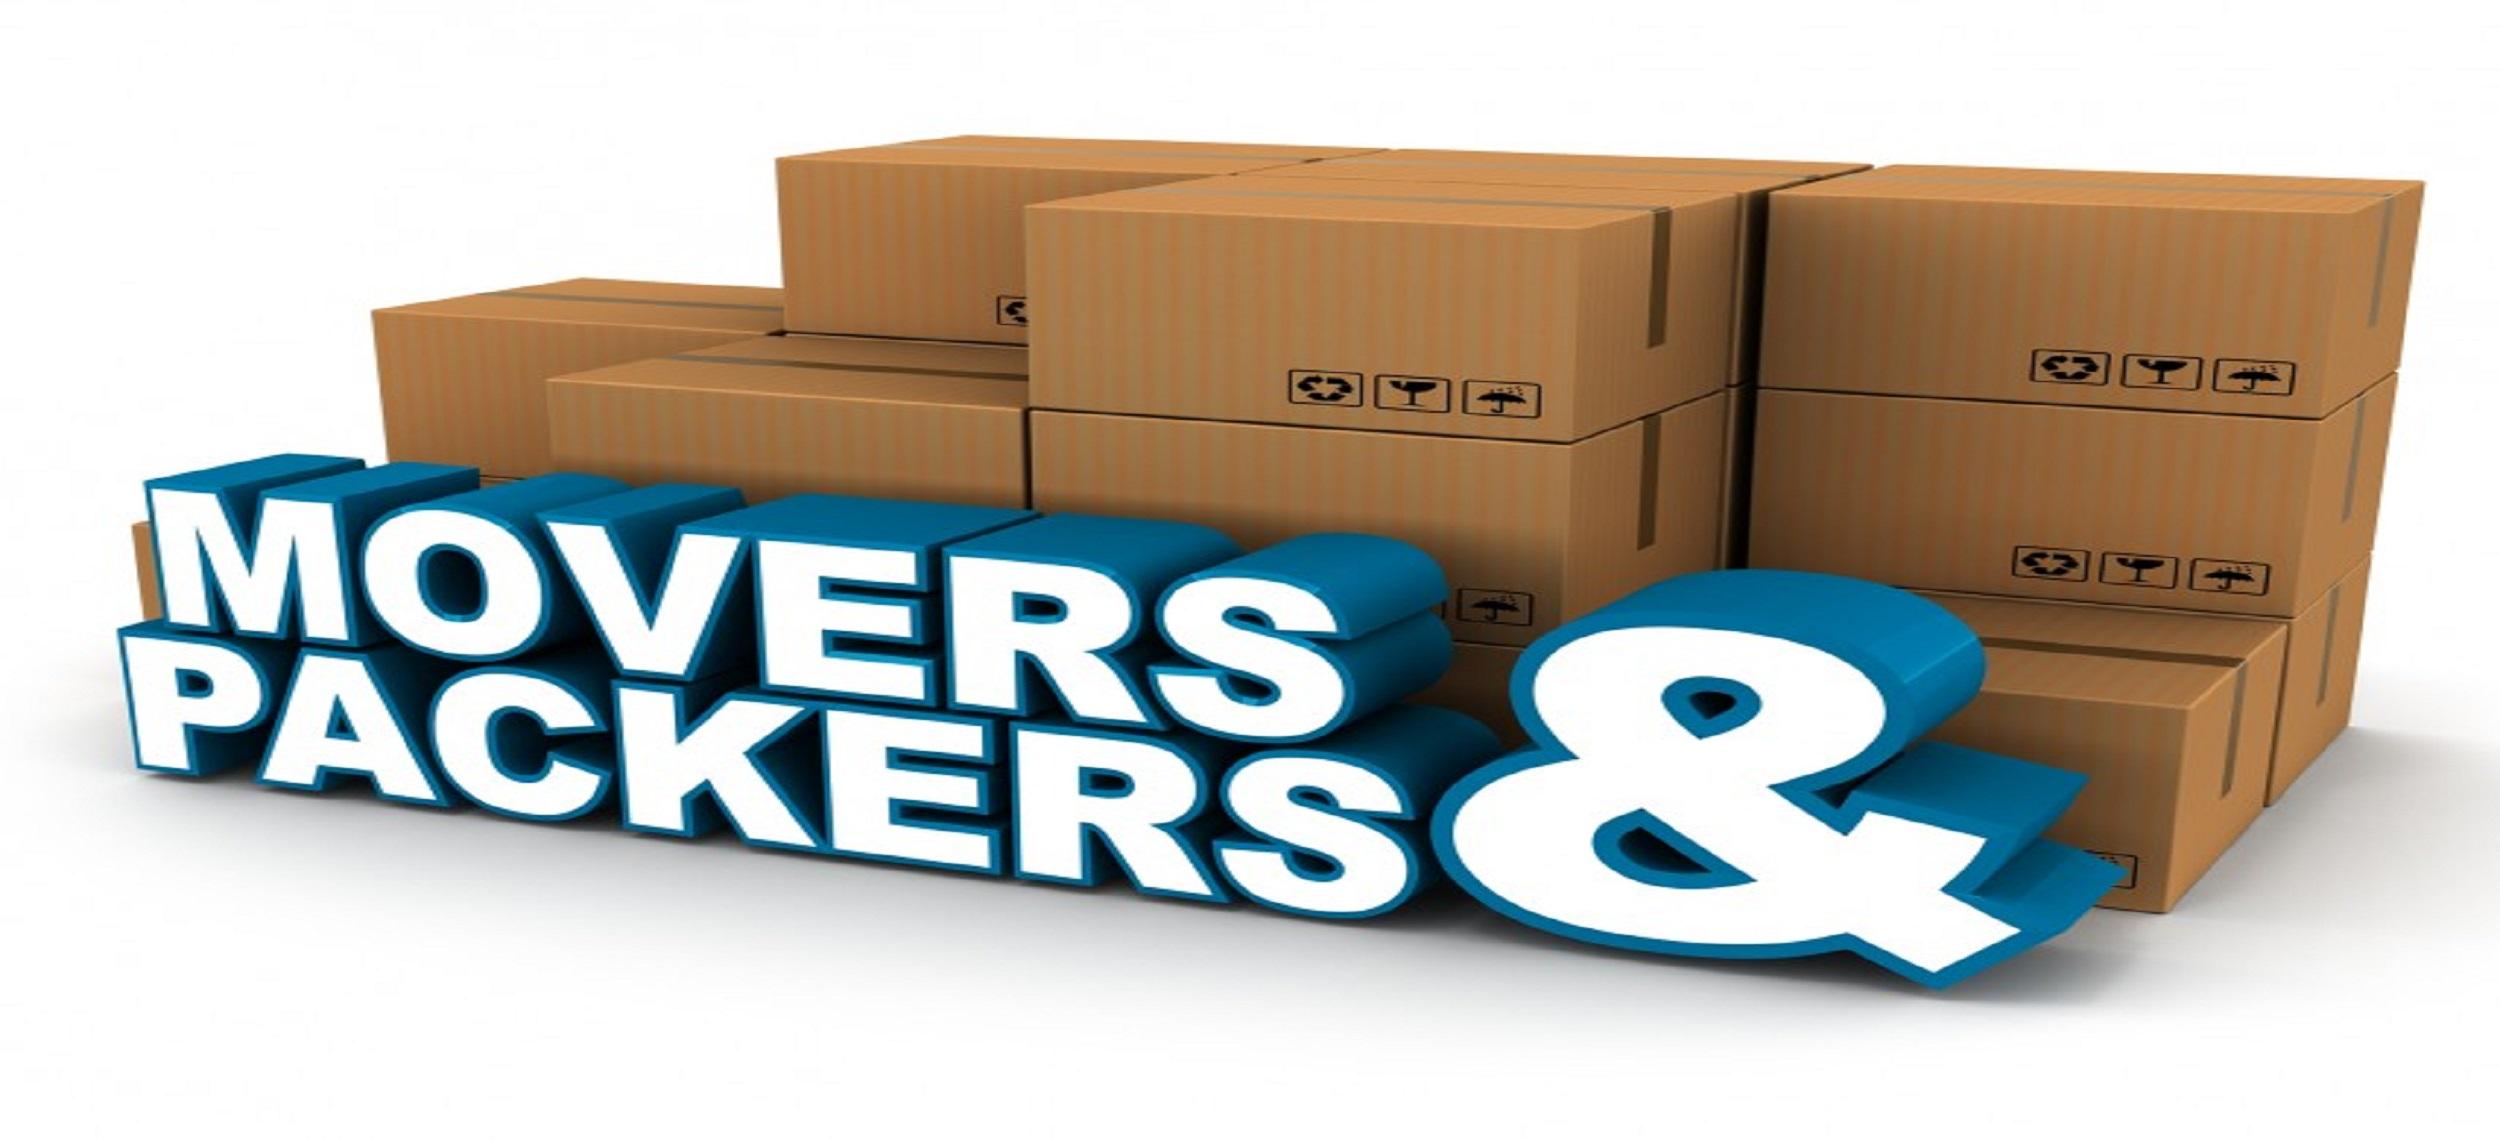 movers & packers